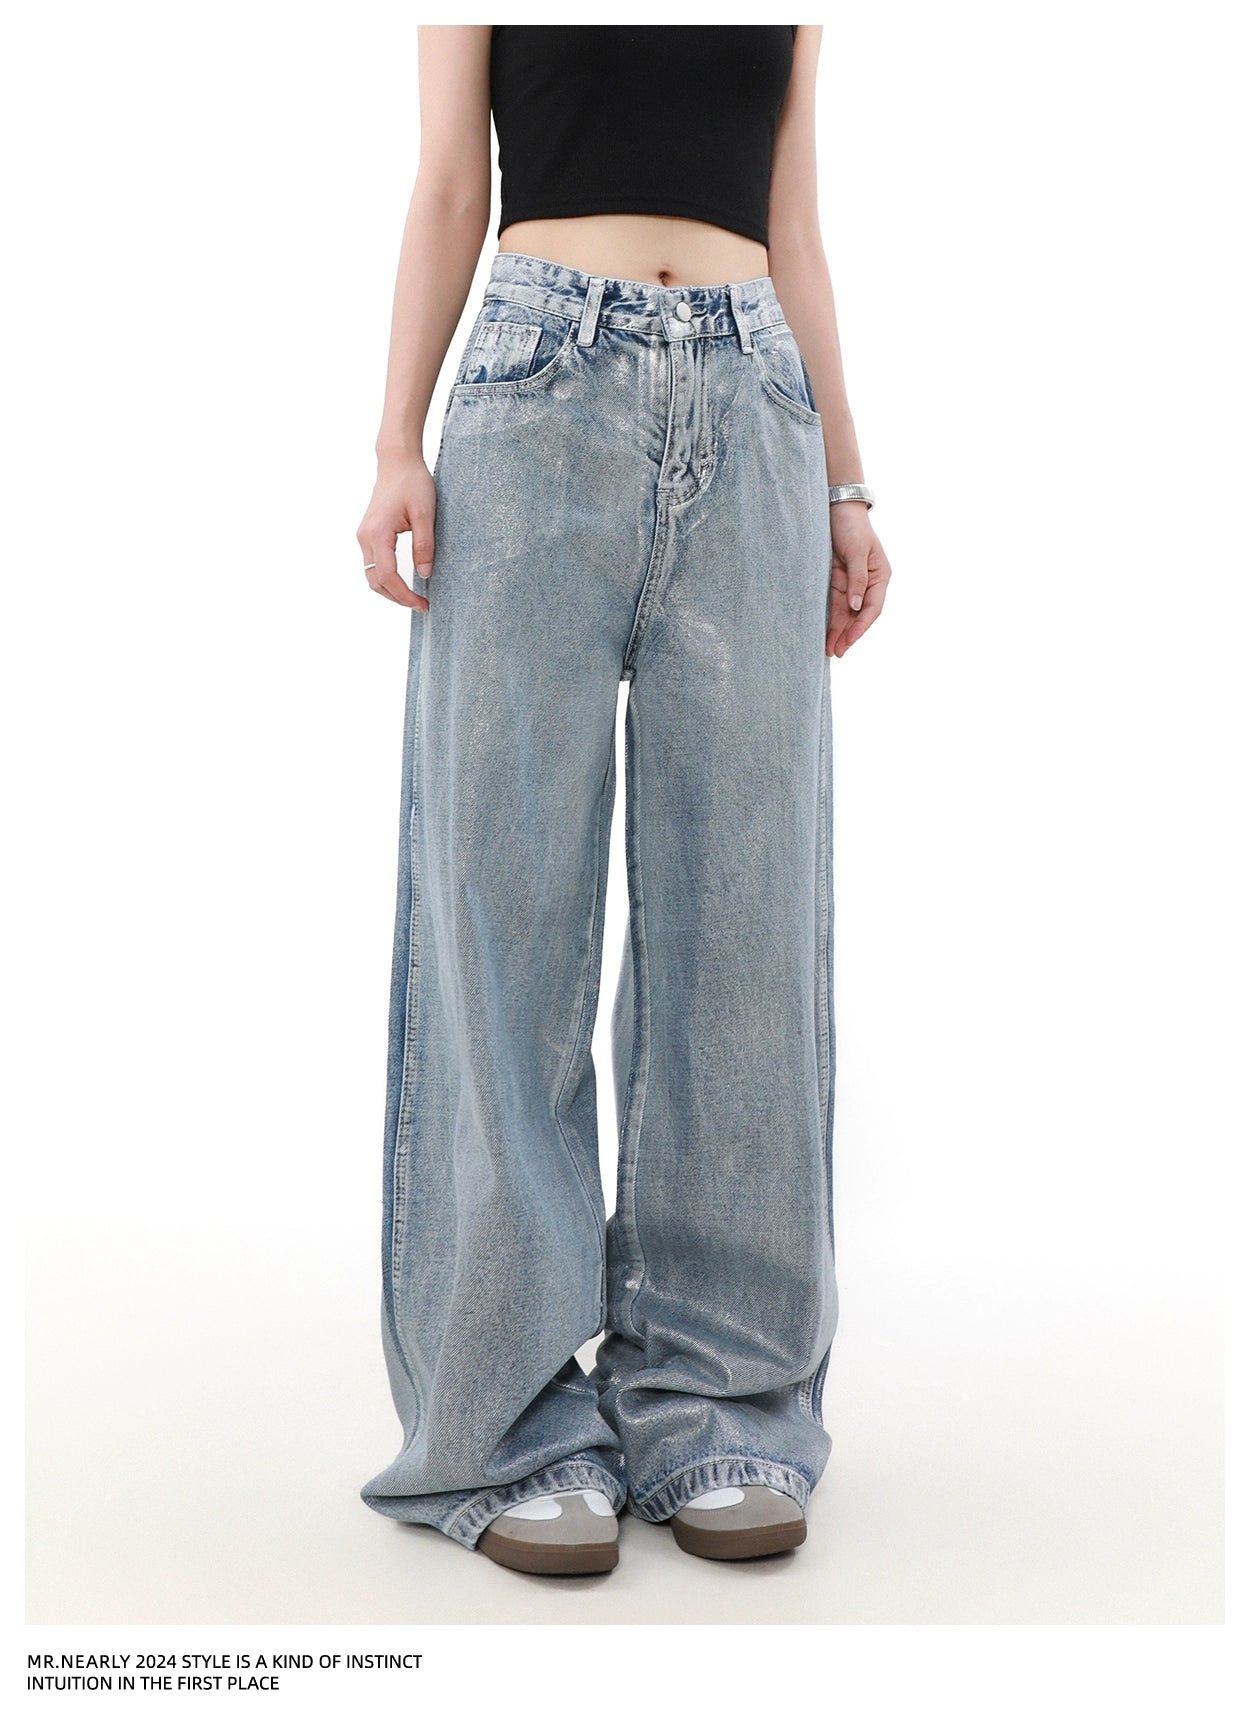 Faded Paint Splashed Jeans Korean Street Fashion Jeans By Mr Nearly Shop Online at OH Vault